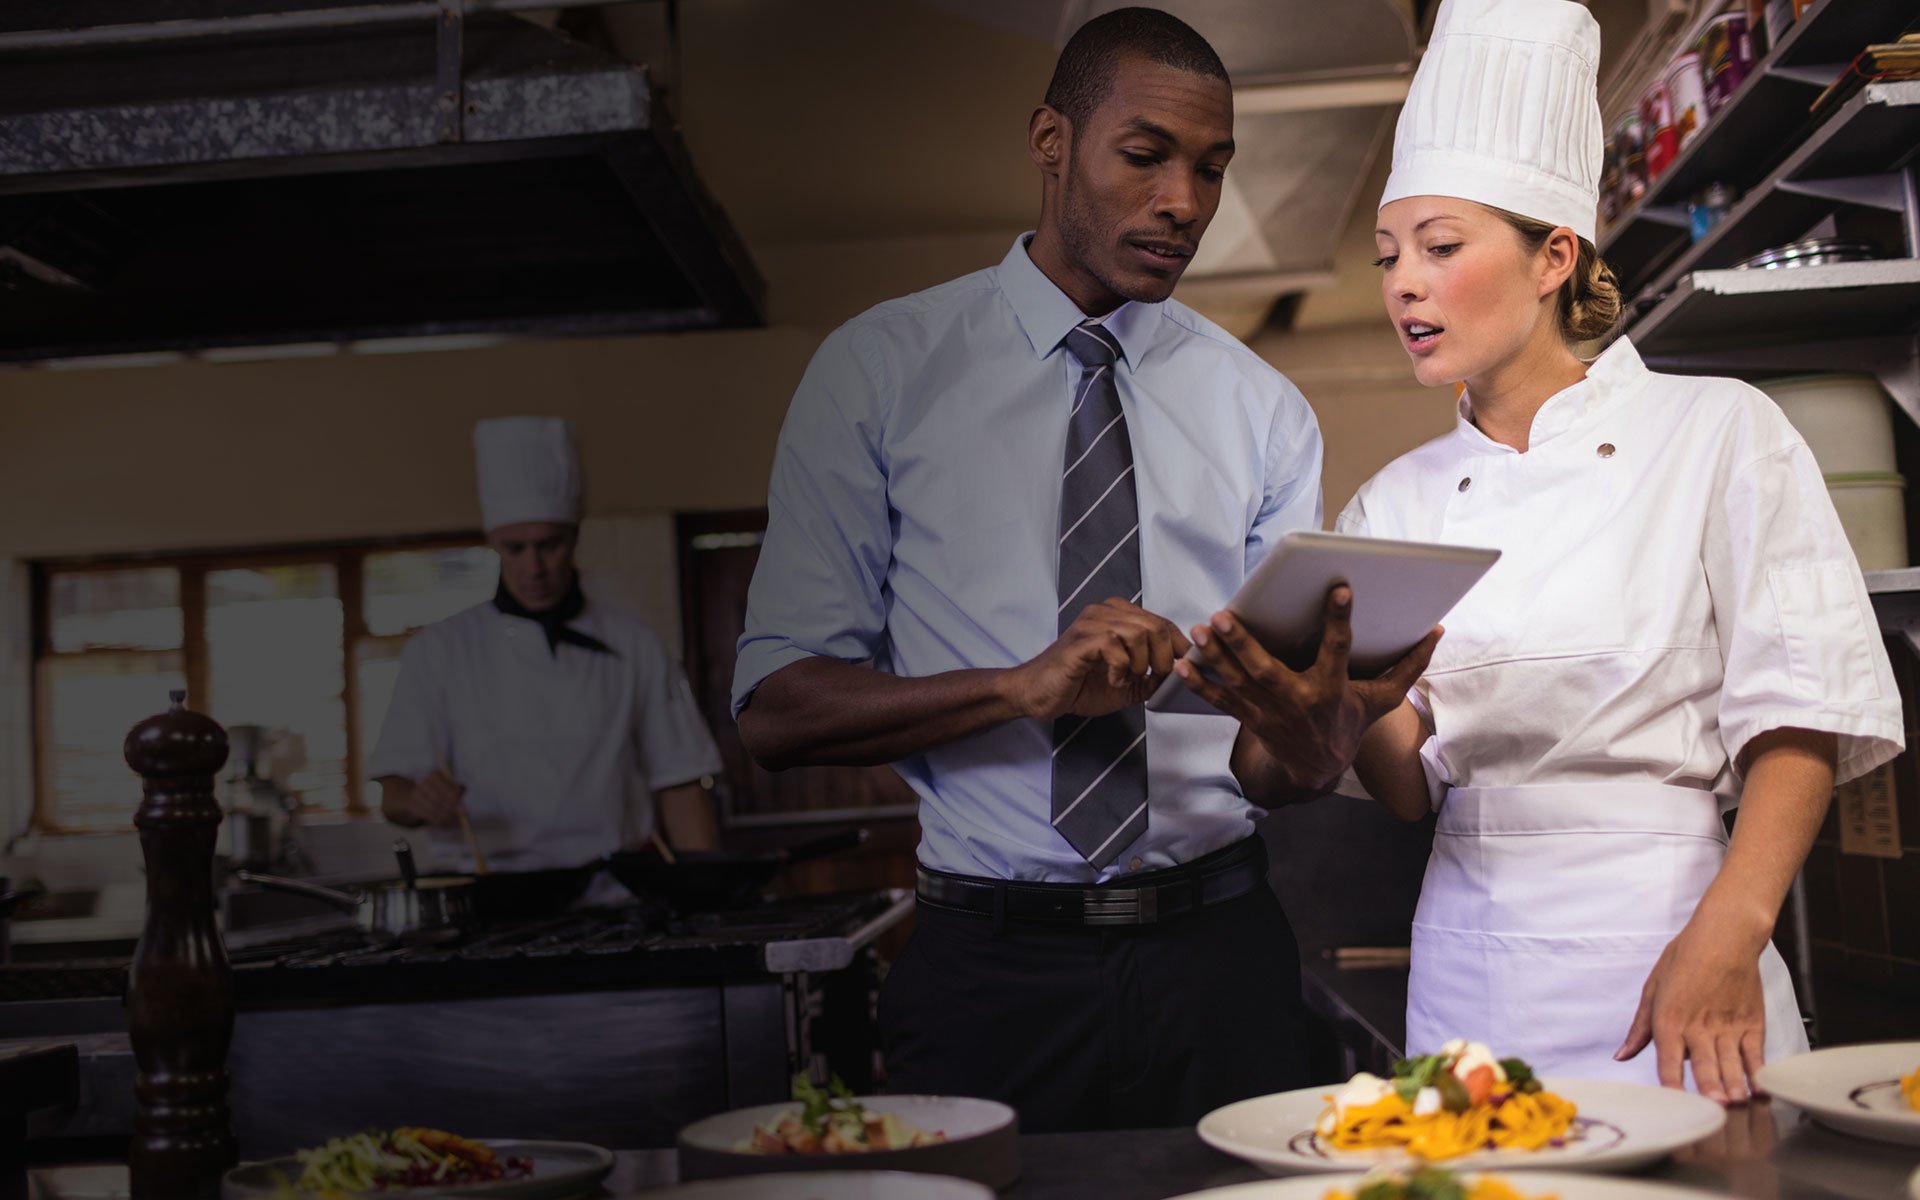 Food Service in Hospitality